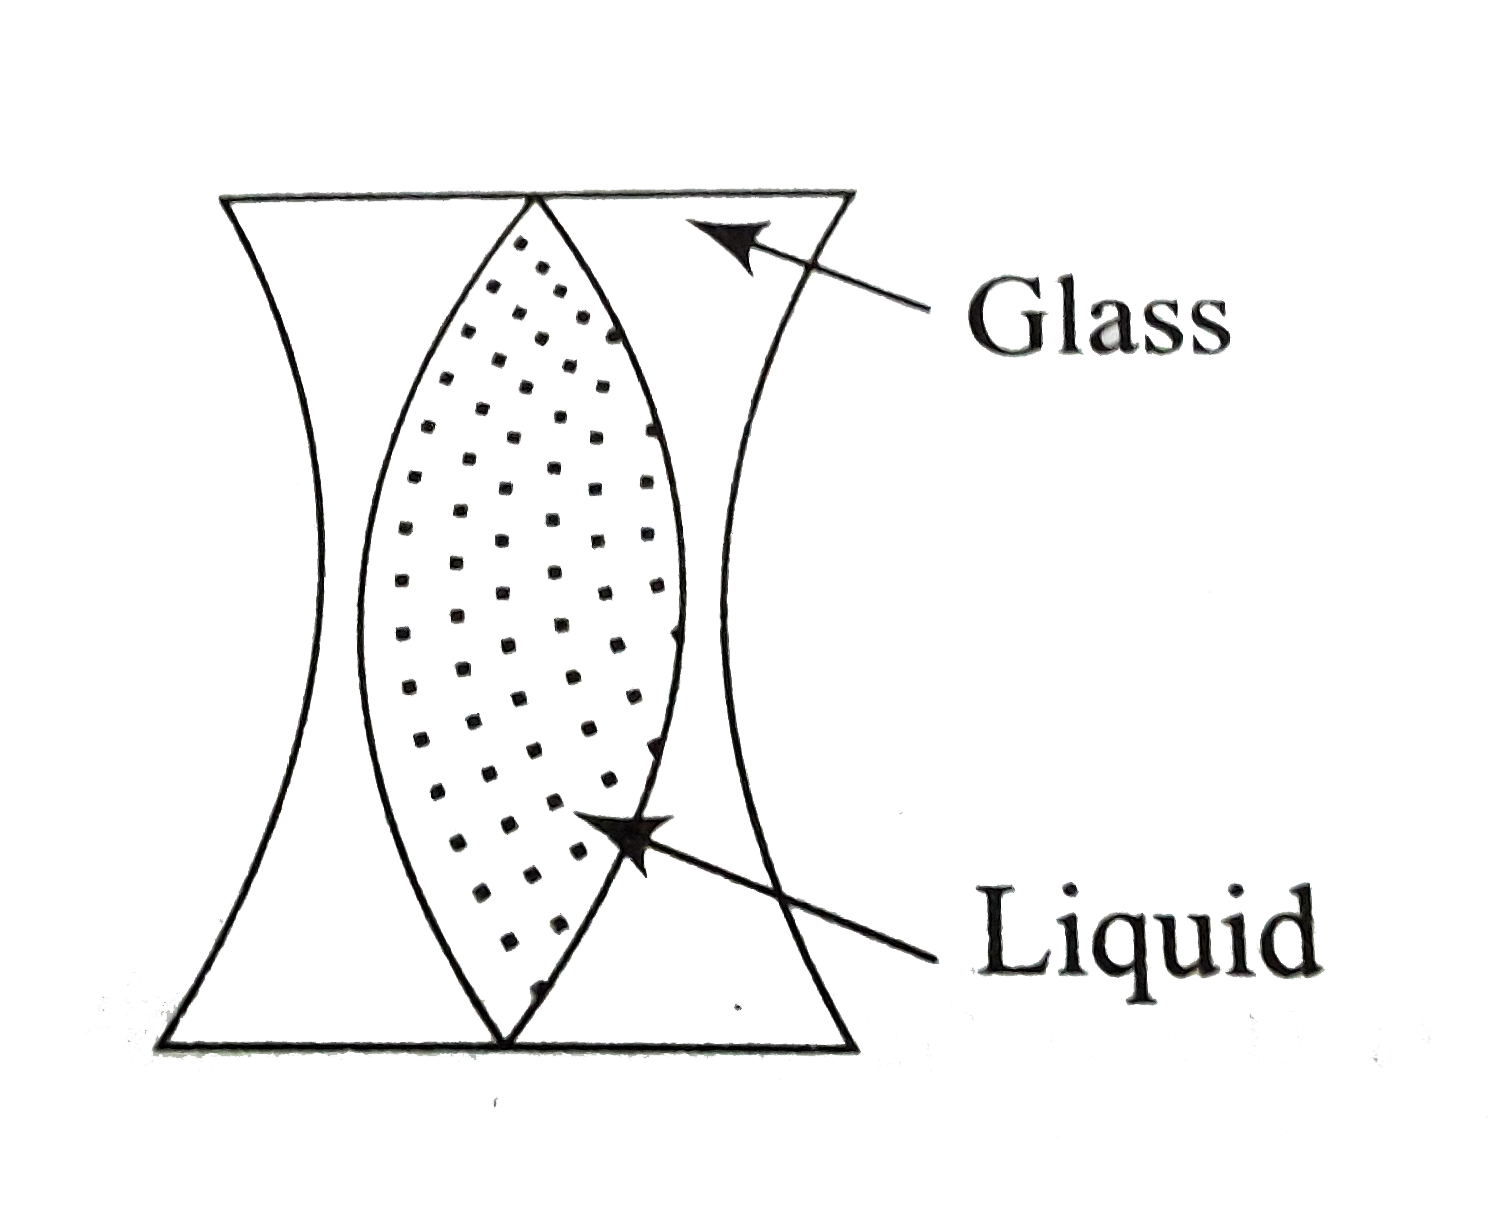 A liquid of refractive index 1.6 is contained in the cavity of a glass specimen of refractive index 1.5 as shown in figure. If each of the curve surface has a radius of curvature of 0.20m, the arrangement obehaves as a